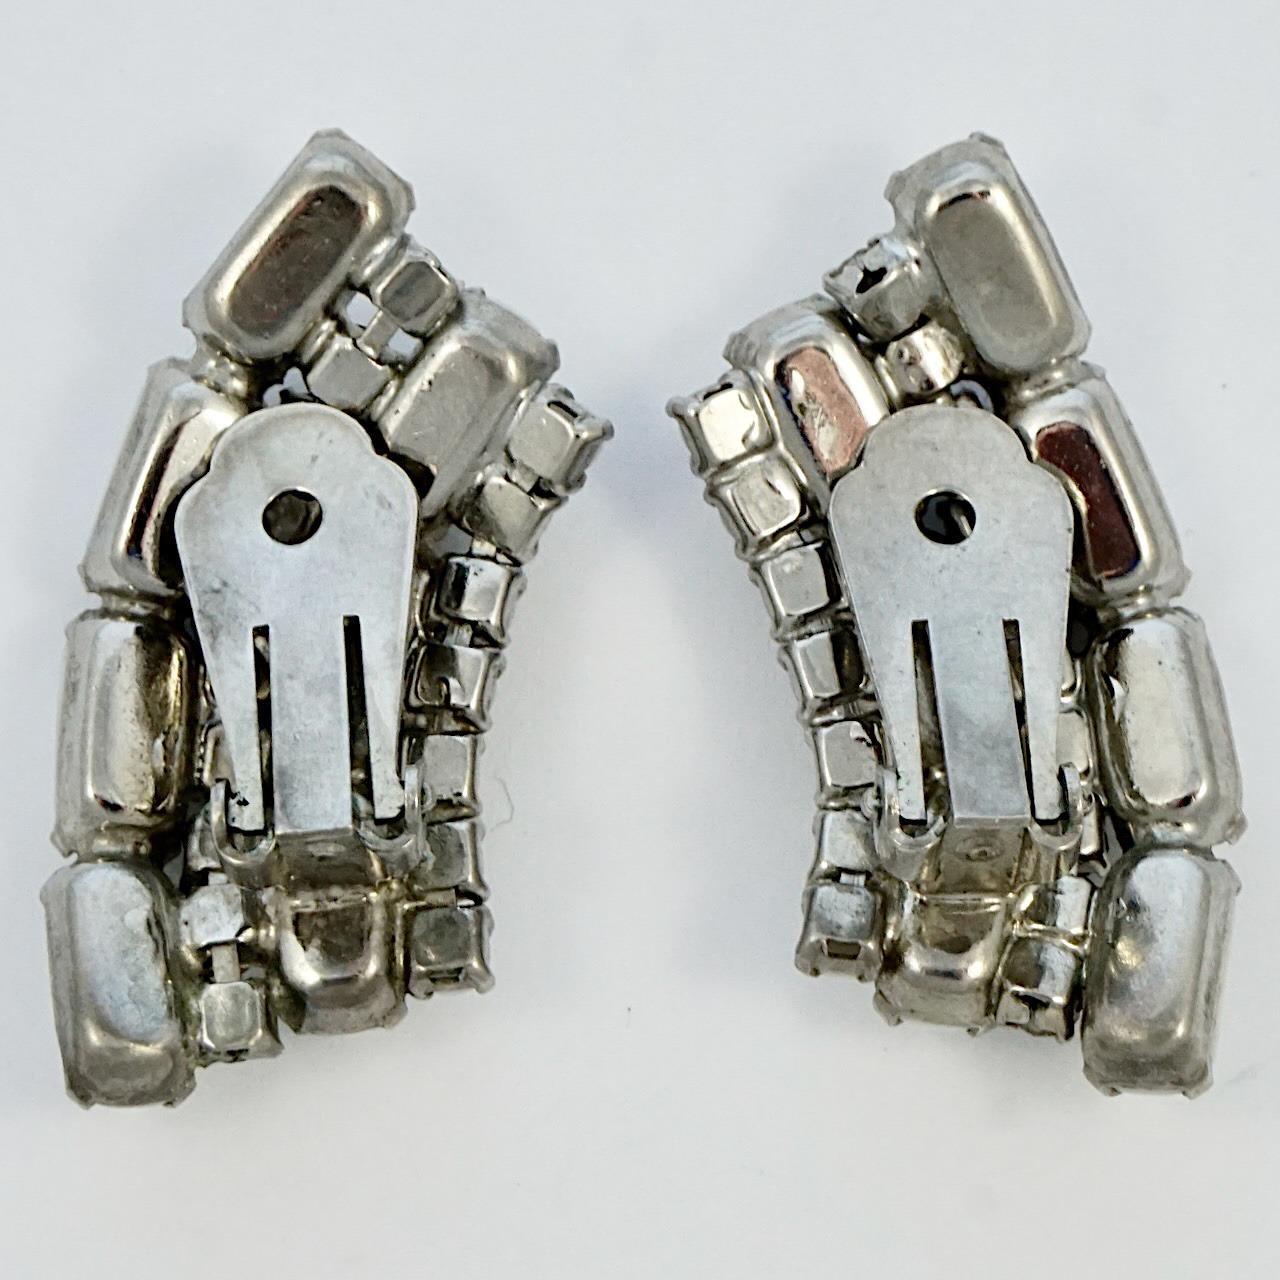 Wonderful silver tone clip on earrings, featuring white milk glass and clear rhinestones. Measuring length 3.9 cm / 1.5 inches. There is some wear to the silver tone metal.

This is a beautiful pair of glamorous climber earrings from the 1950s.